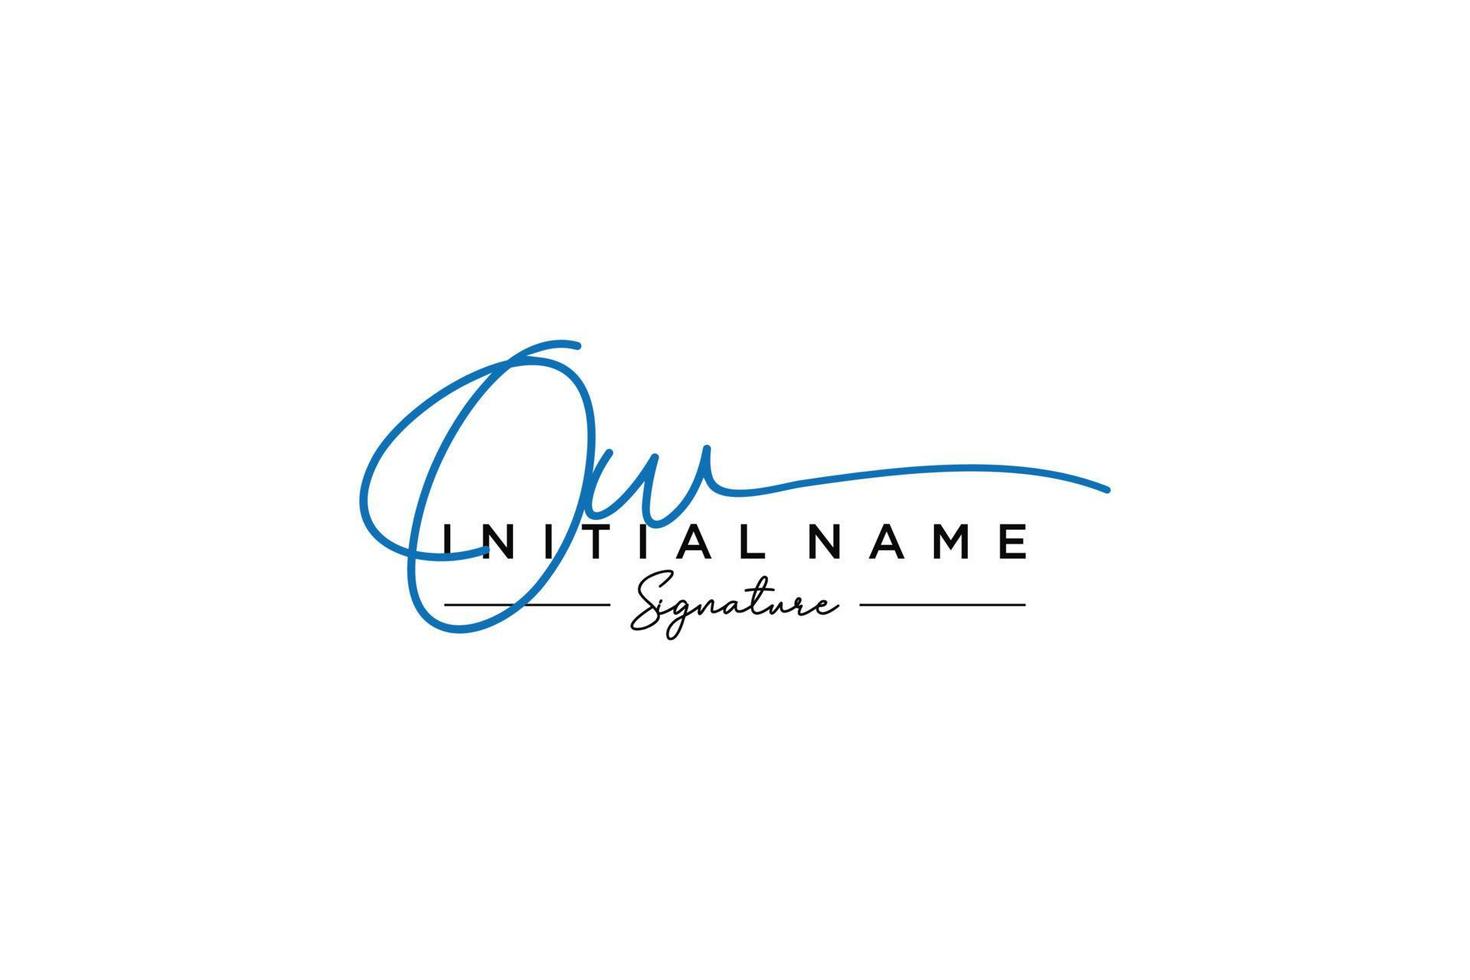 Initial OW signature logo template vector. Hand drawn Calligraphy lettering Vector illustration.